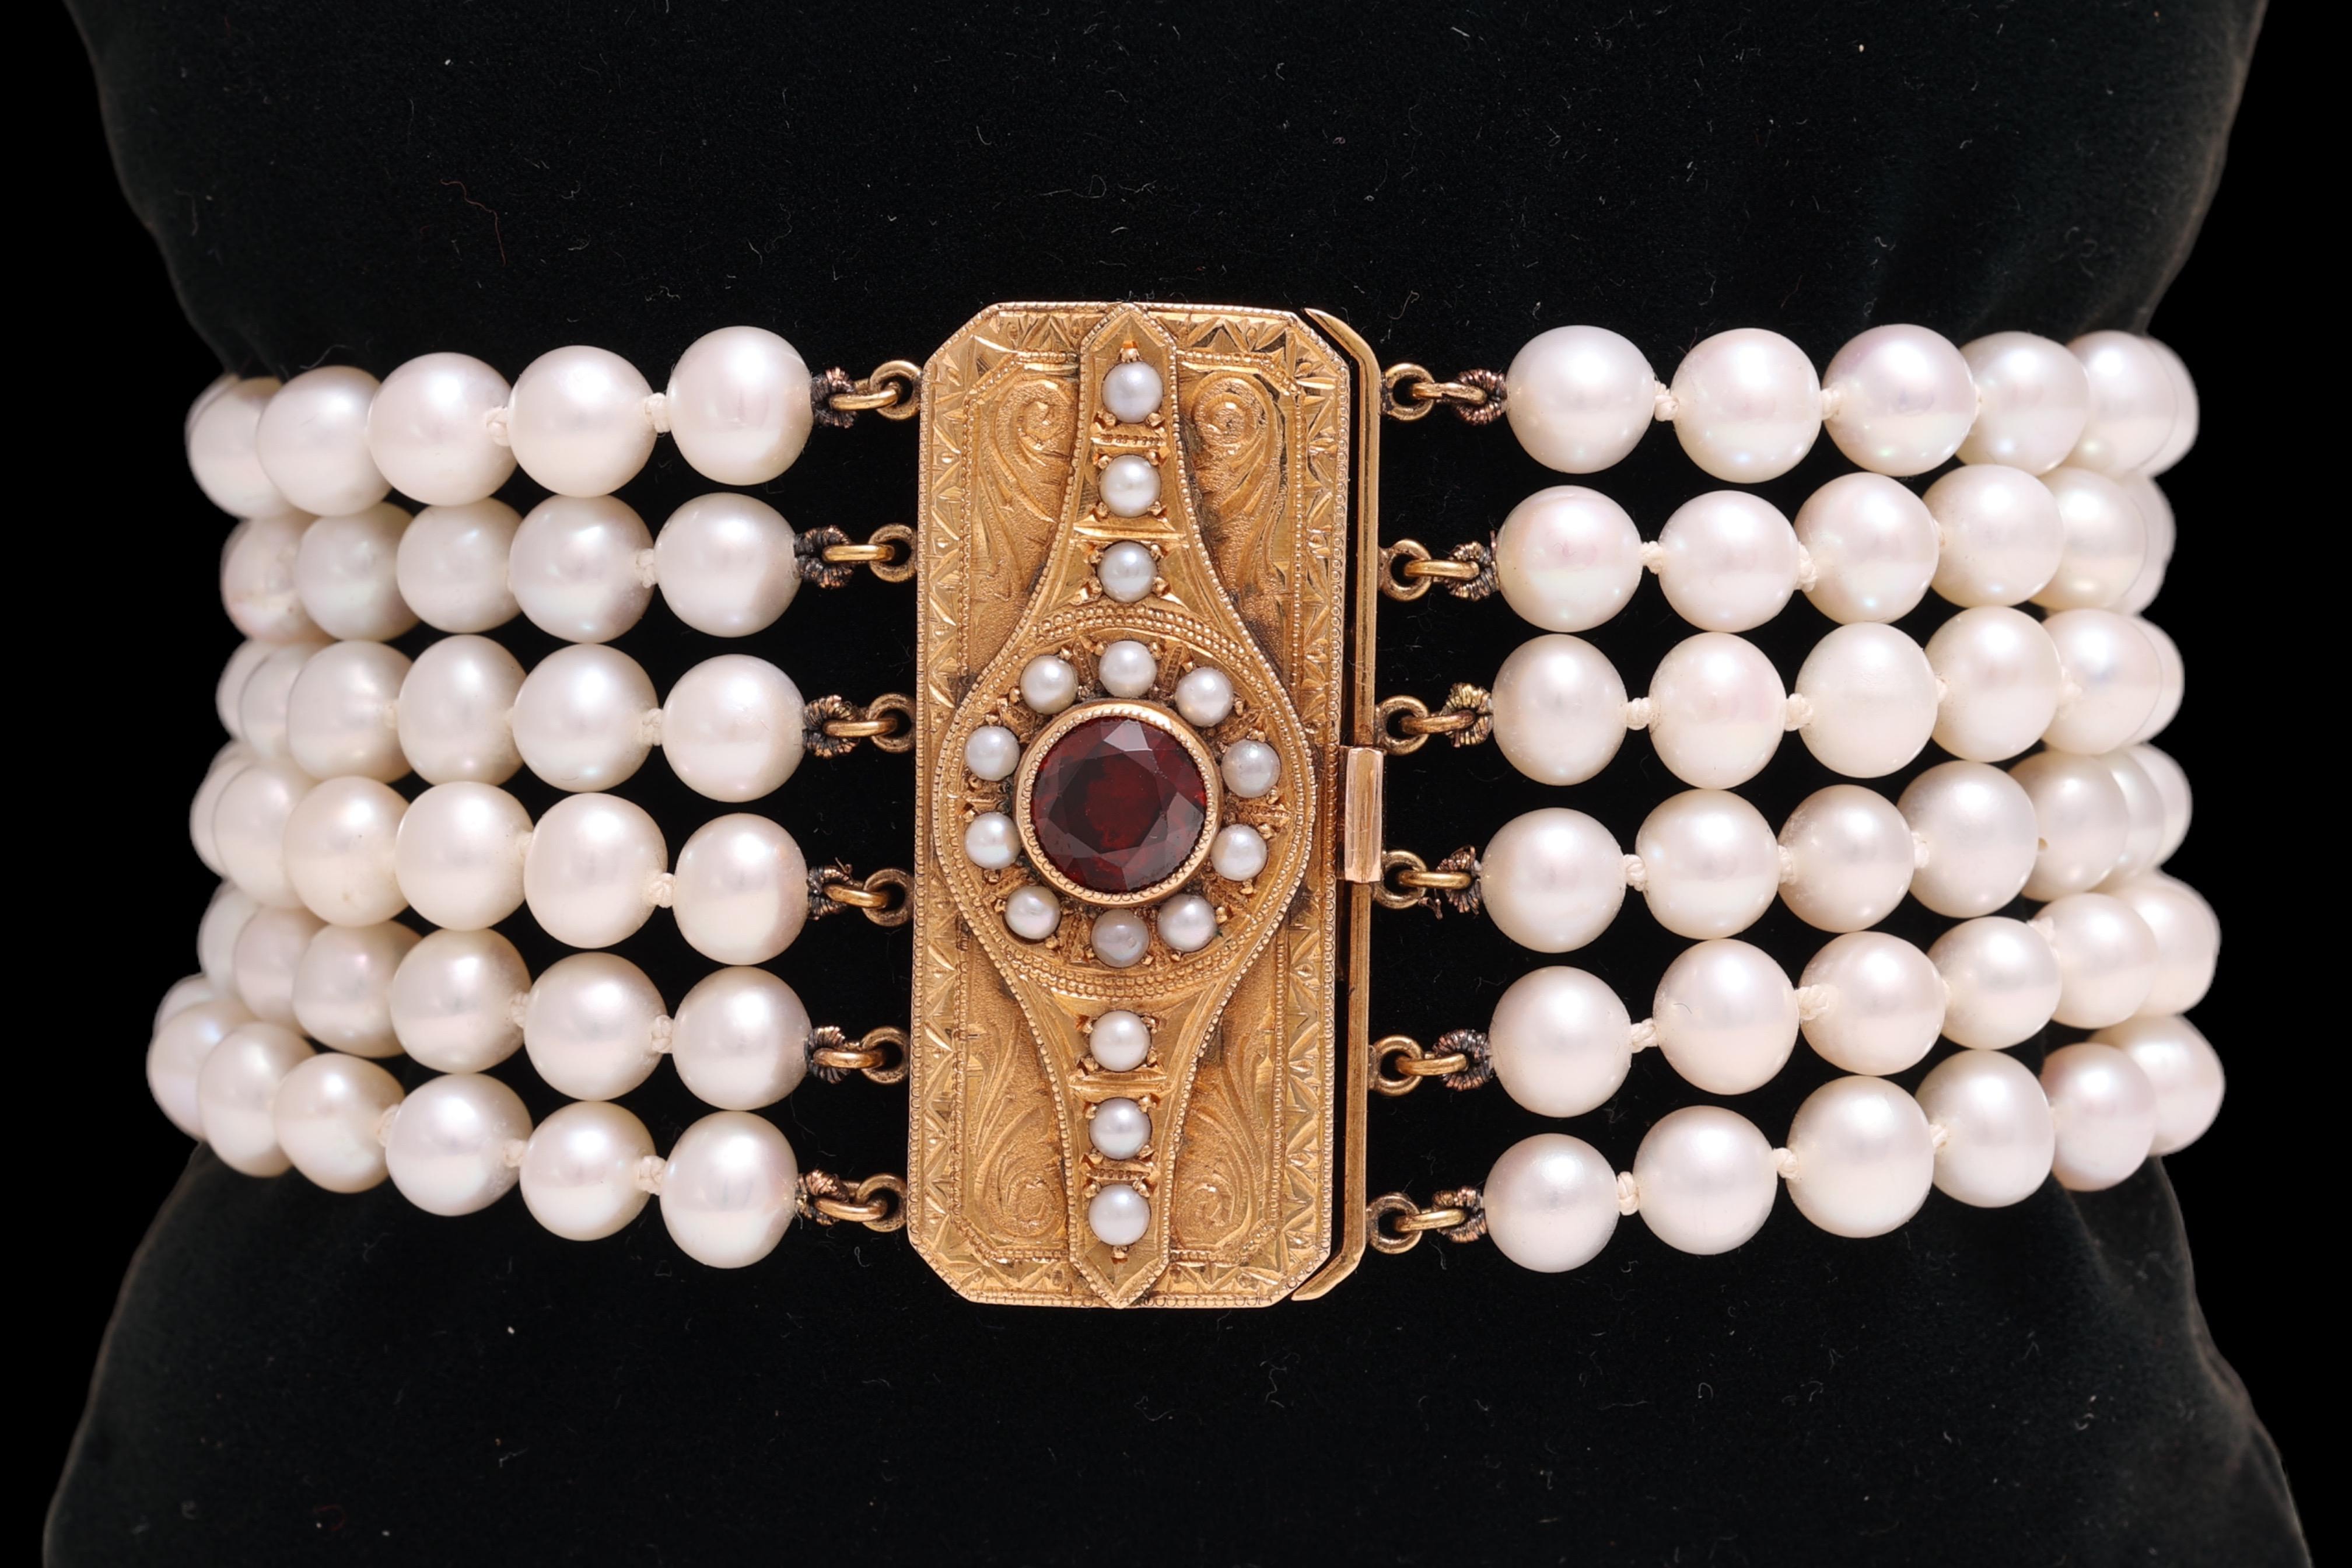 Beautiful Bracelet with 6 Rows of Japanese Akoya Pearls & Art deco Gold Locker with 1ct. Garnet 

Garnet: Red garnet stone 1 ct. 

Pearls: 174 pearls with diameter 6 mm, 16 mini pearls diameter 2.2 mm

Material: 18 kt. yellow gold

Measurements: 20